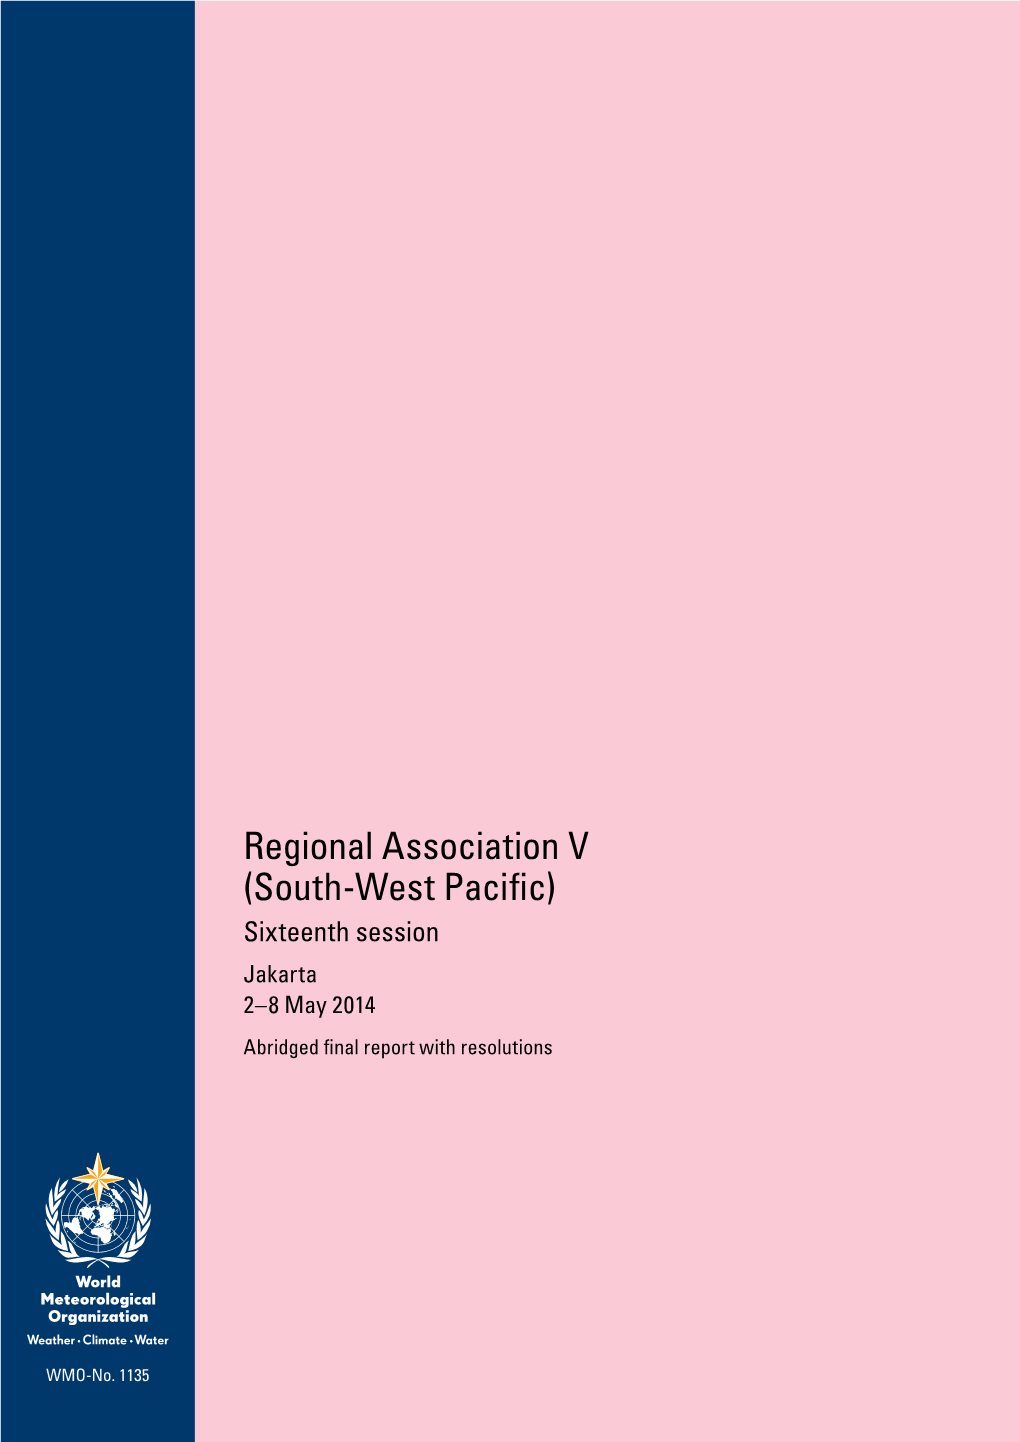 Regional Association V (South-West Pacific) Sixteenth Session Jakarta 2–8 May 2014 Abridged Final Report with Resolutions